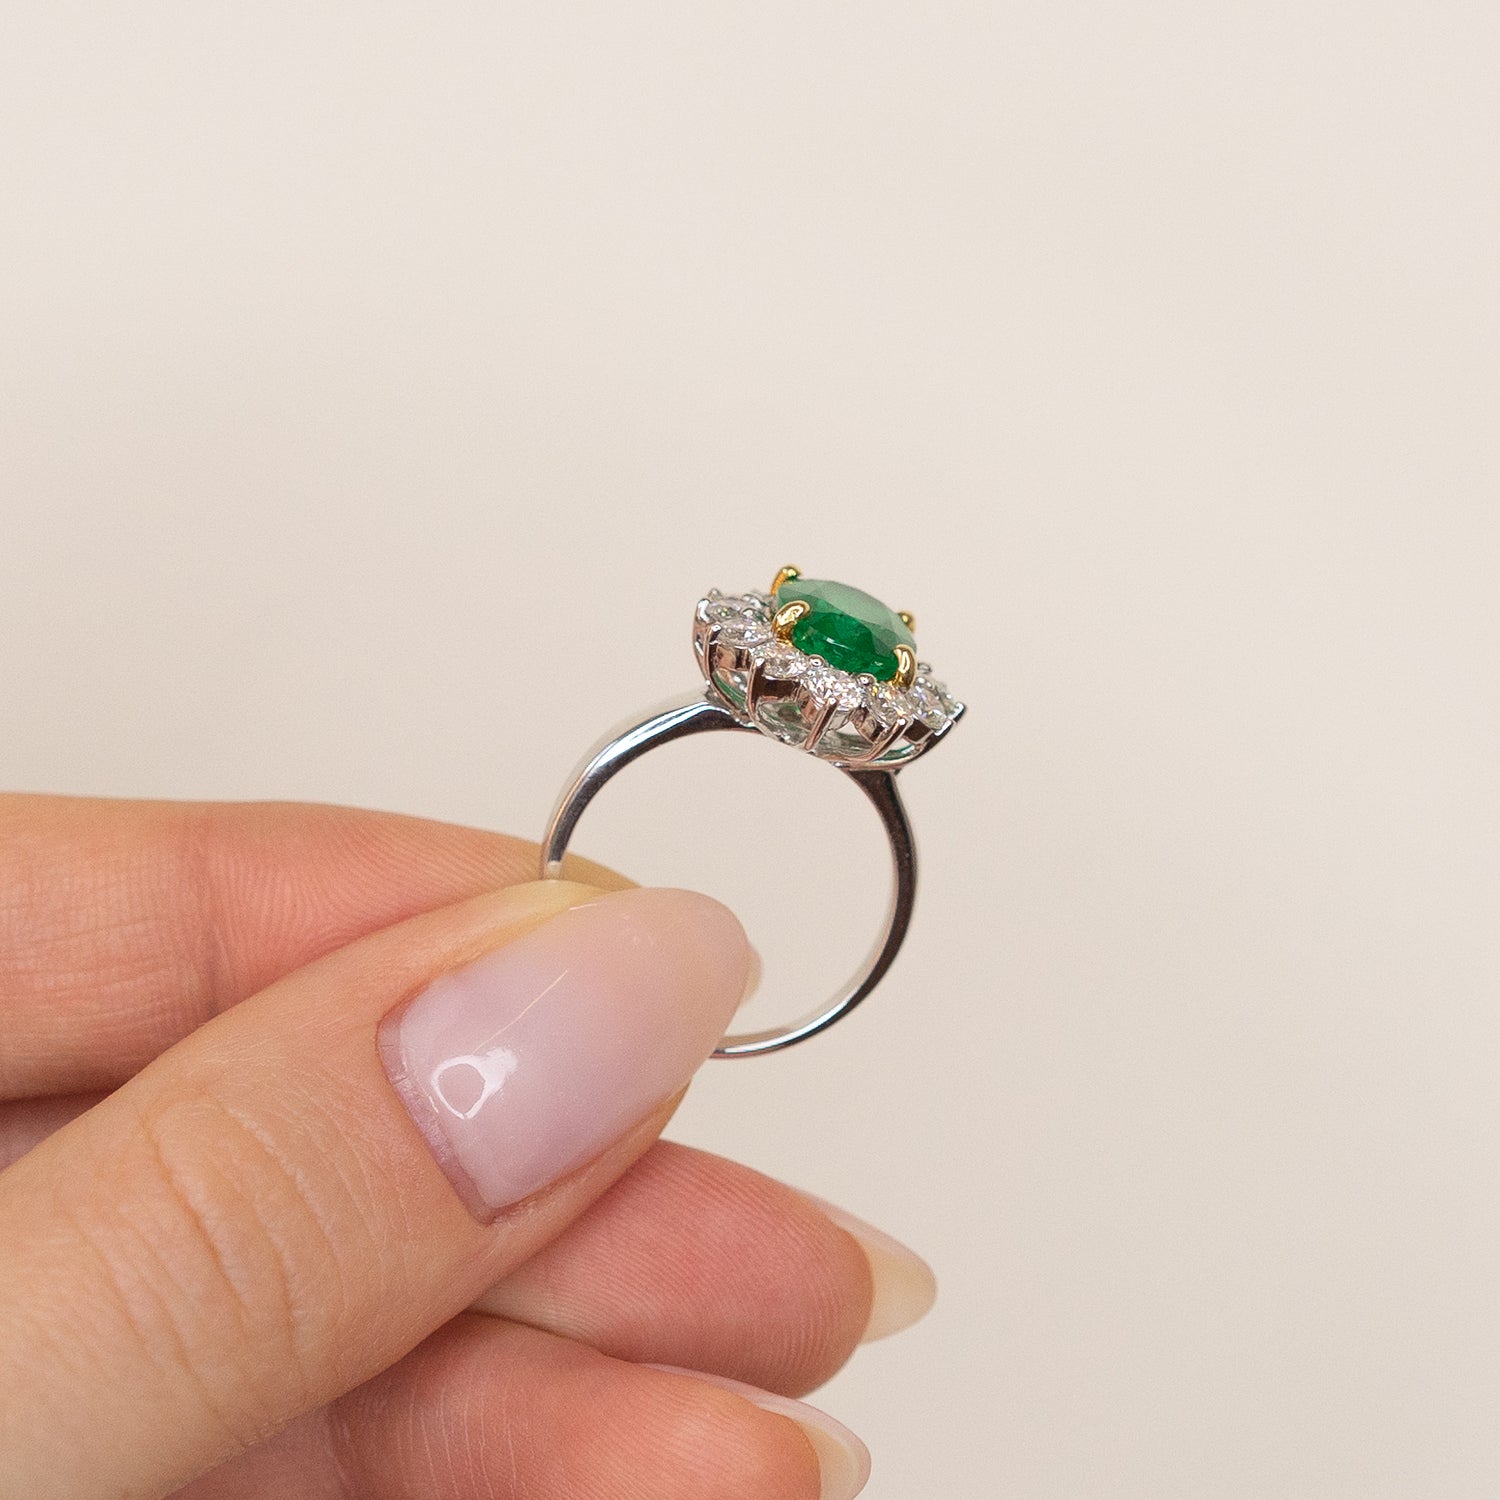 2.80ct Oval Cut Emerald Ring with Diamonds